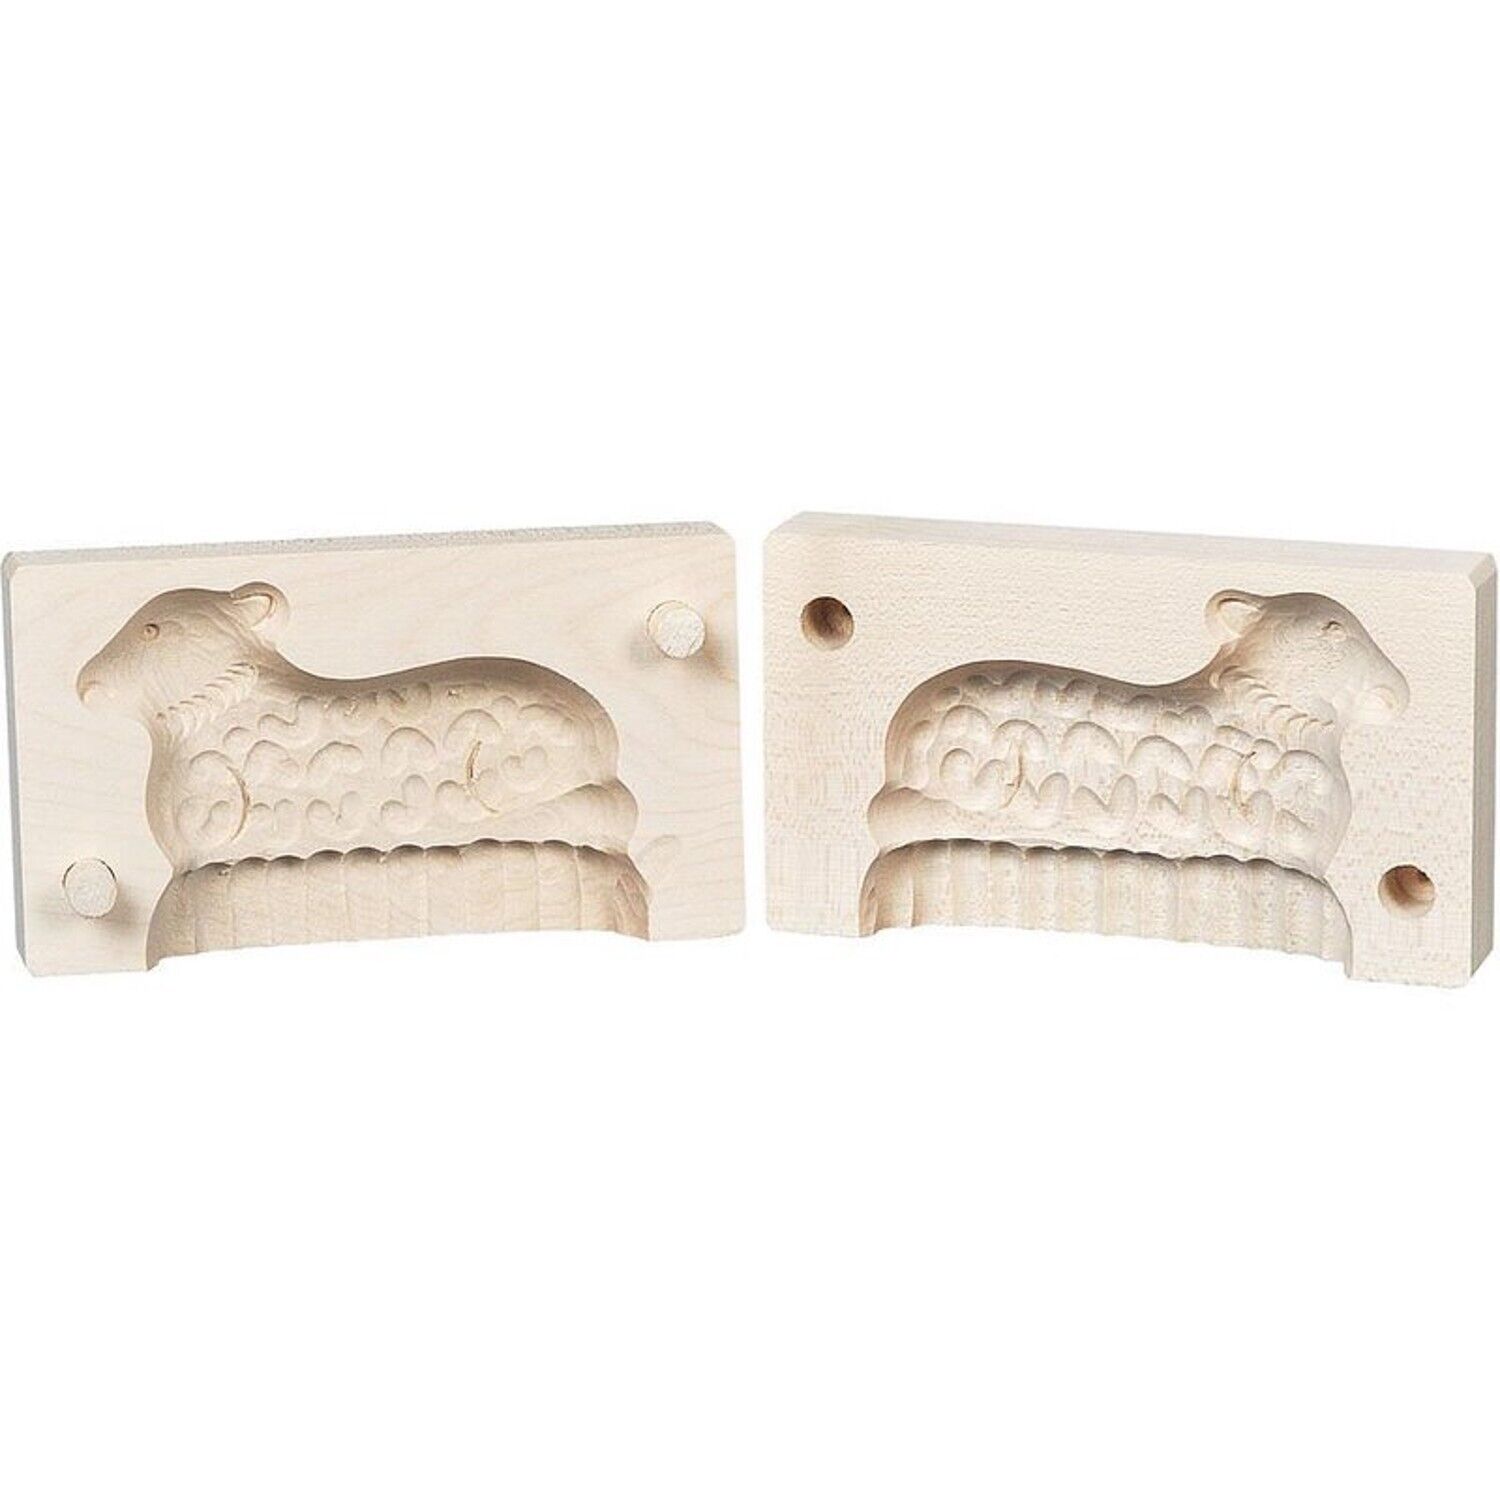 German Hand Made Finely Carved 2 Piece Butter Mold Lamb Design